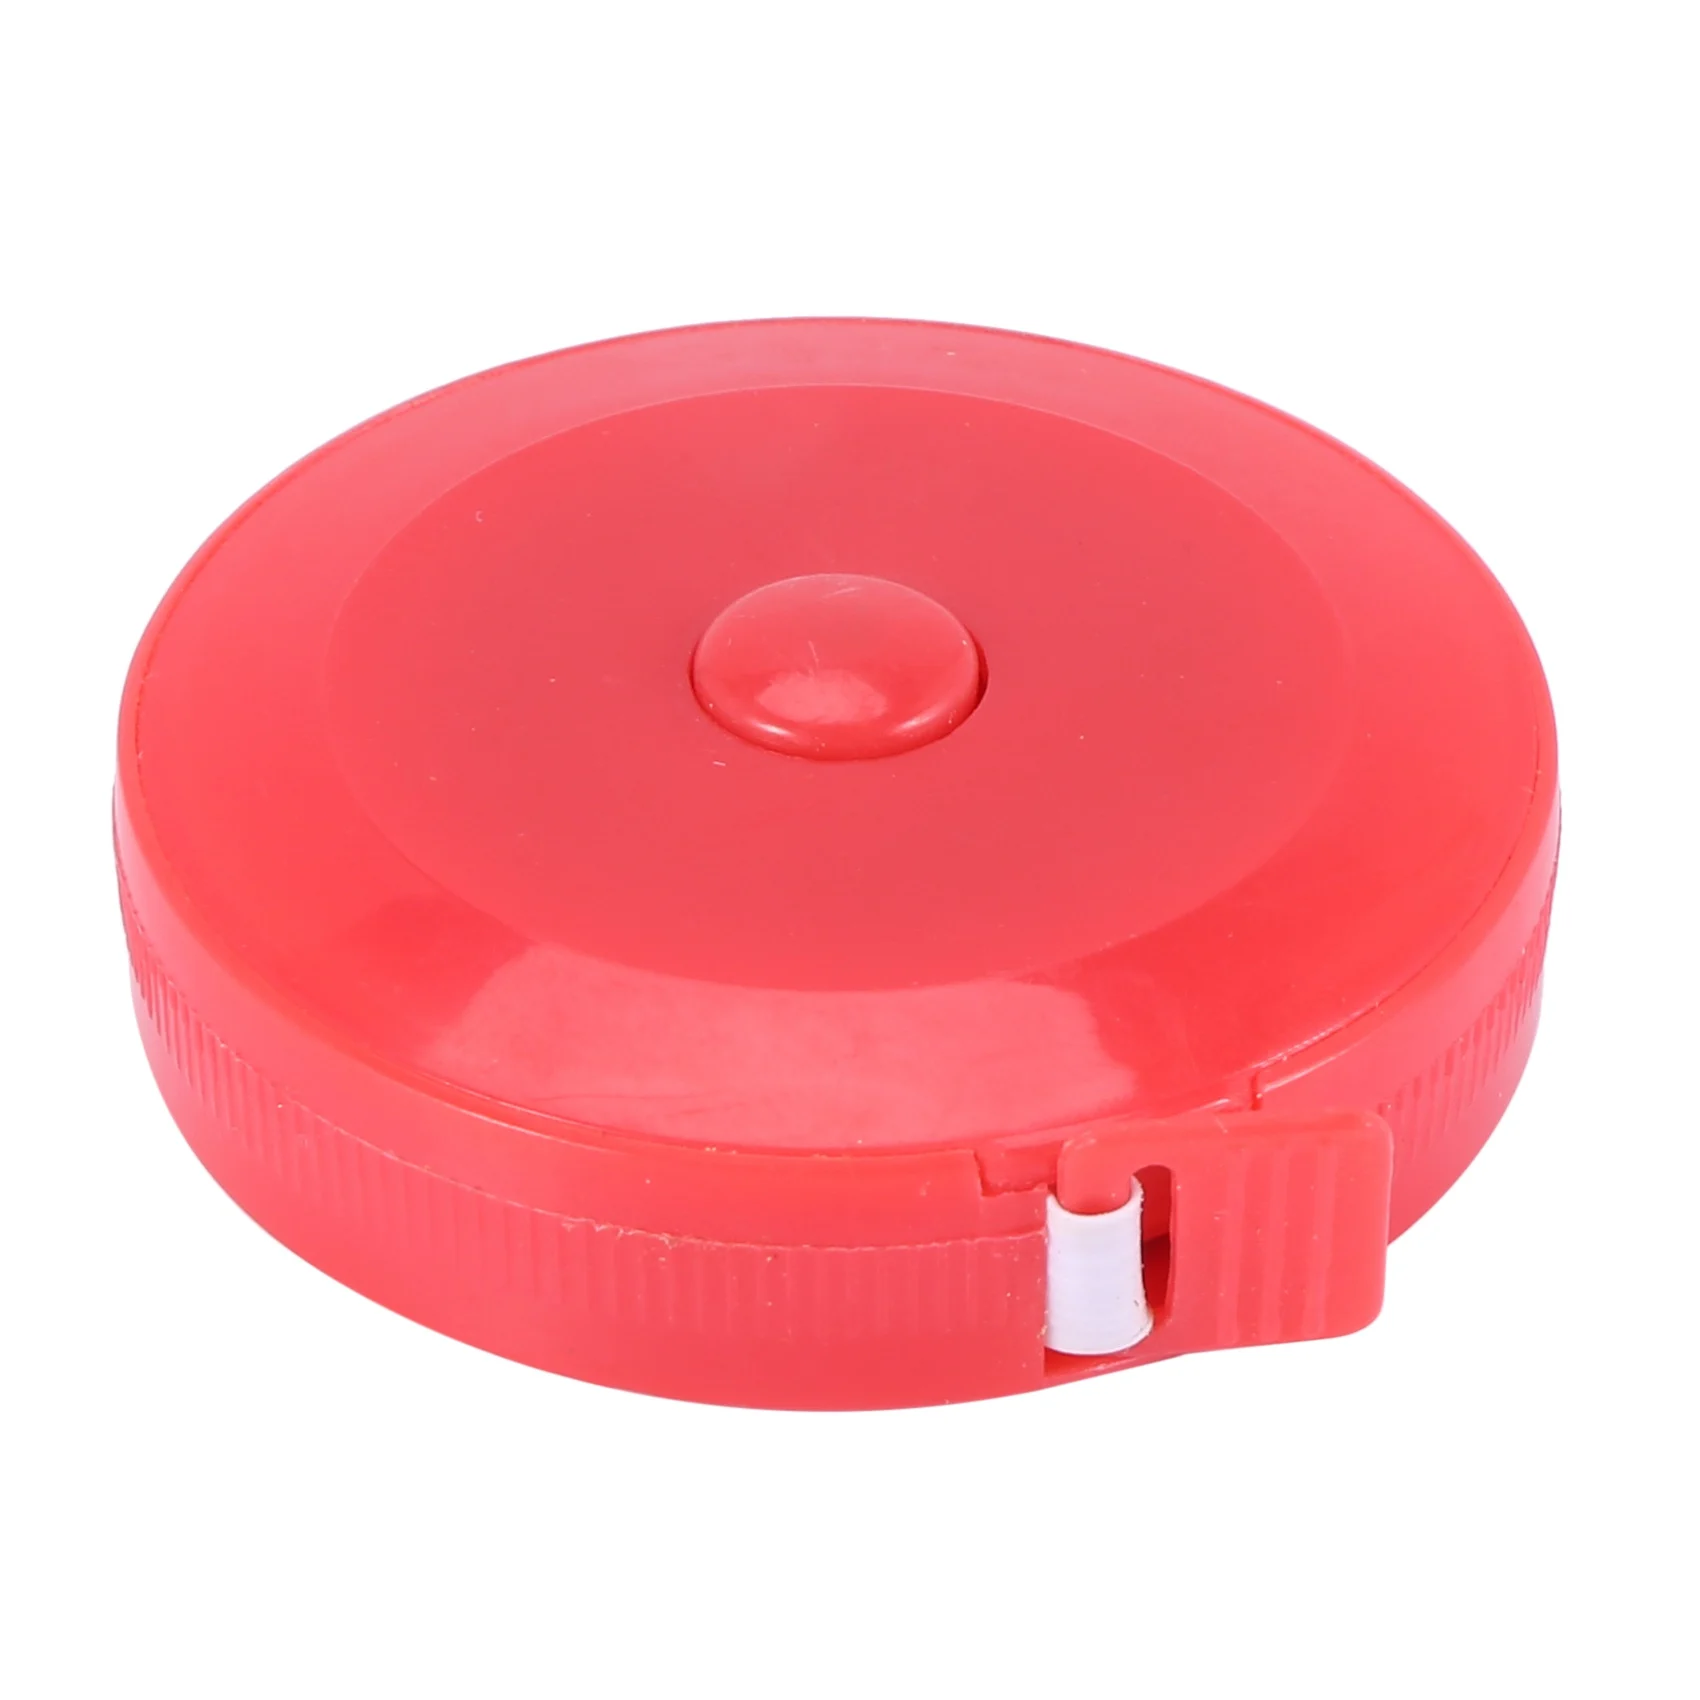 

Tailor Sewing Retractable Ruler Tape Measure Red 1.5M/60"